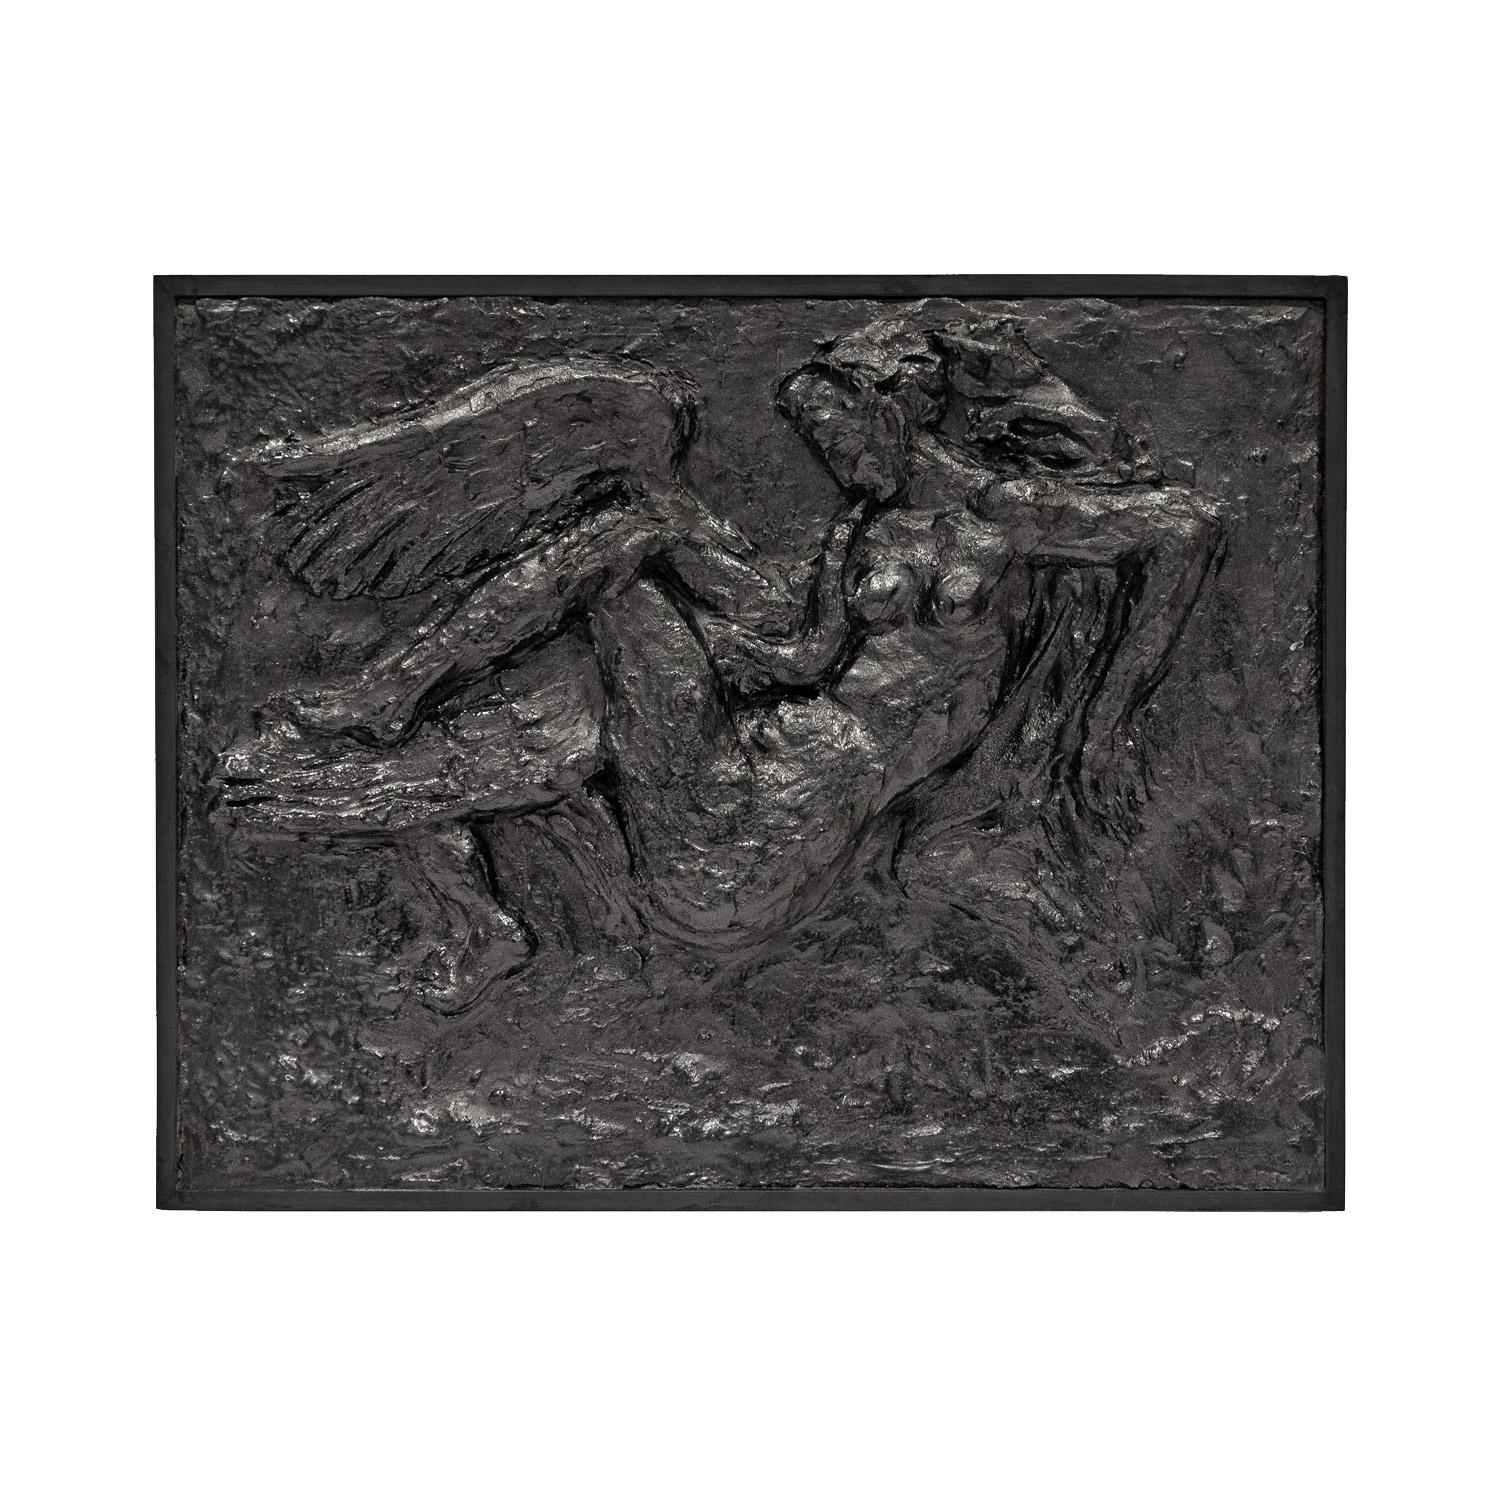 Unique wall sculpture in Hydro Stone plaster with bronze frame depicting the myth of Leda and the Swan by Philip & Kelvin LaVerne, American 1960's (signed “PK LaVerne” on frame).  Leda and the Swan is a Greek myth which the LaVernes revisited with